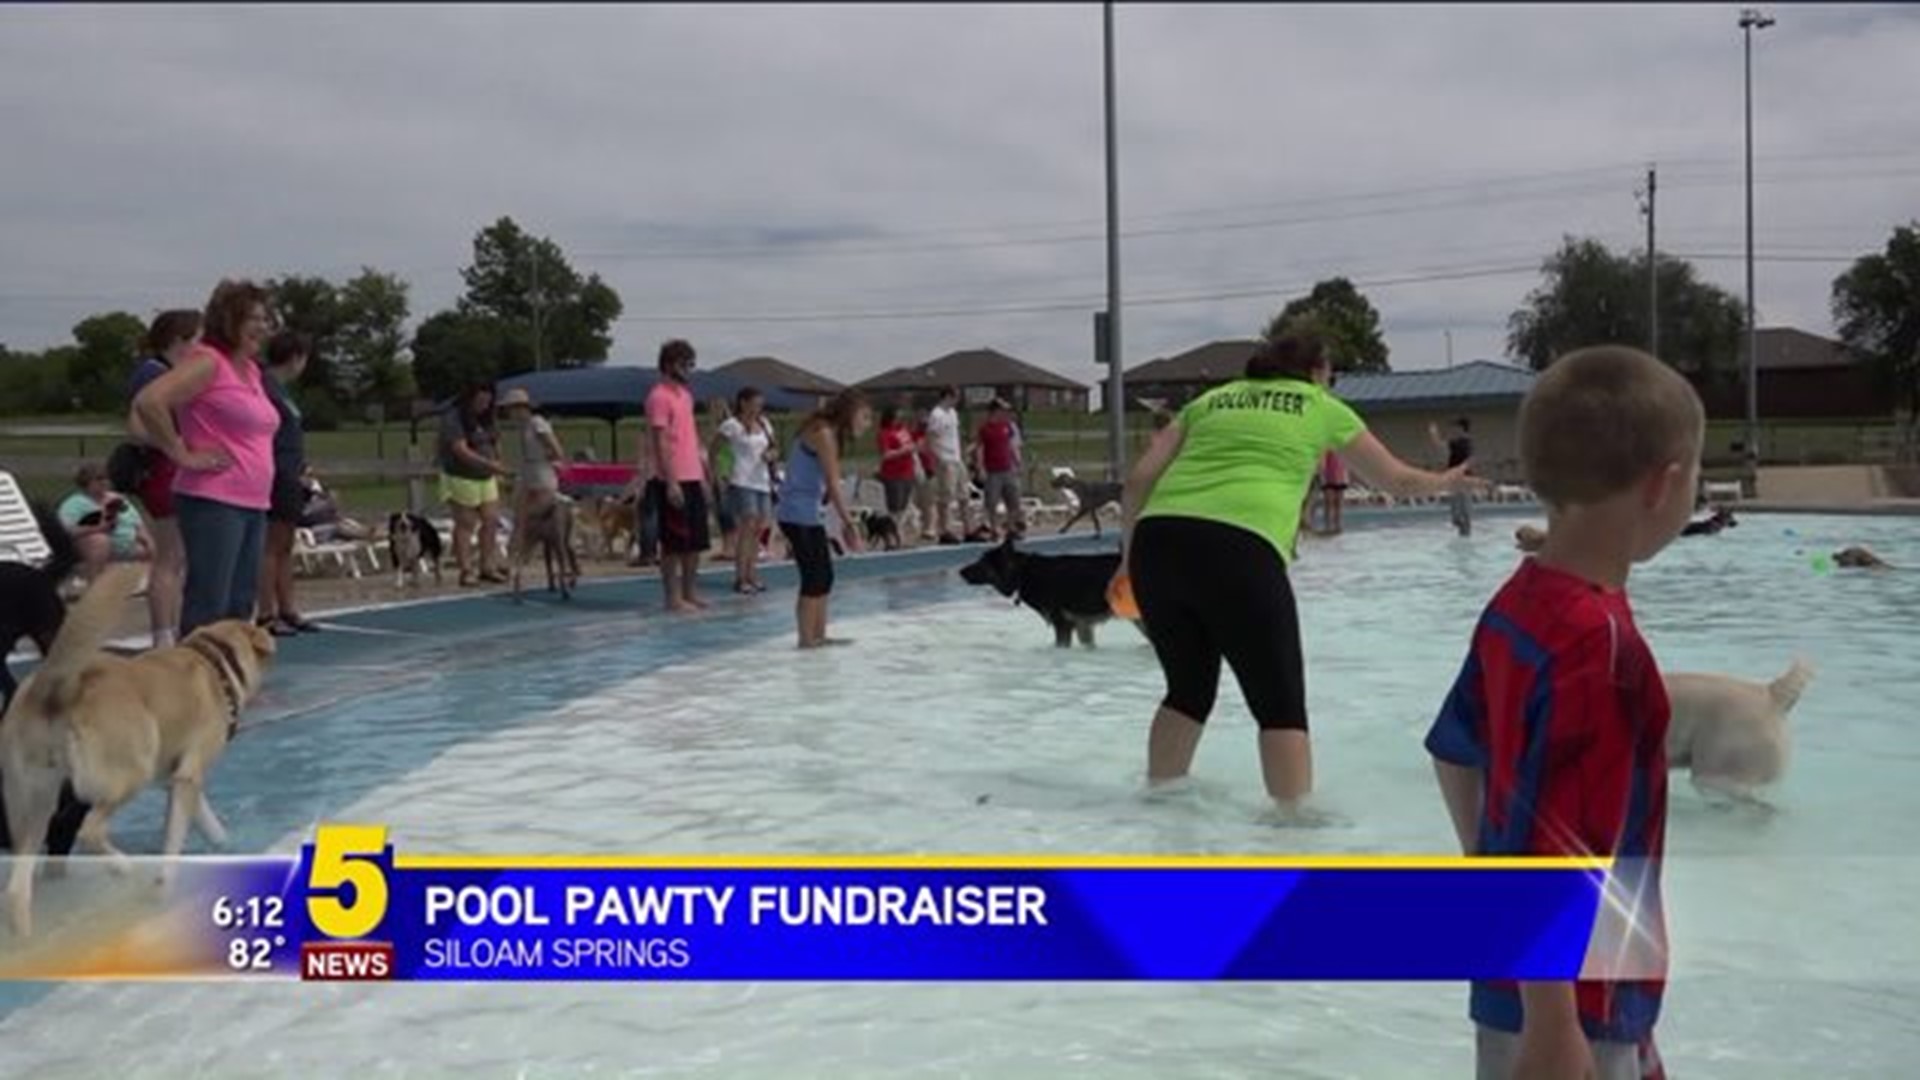 Pool Pawty Fundraiser